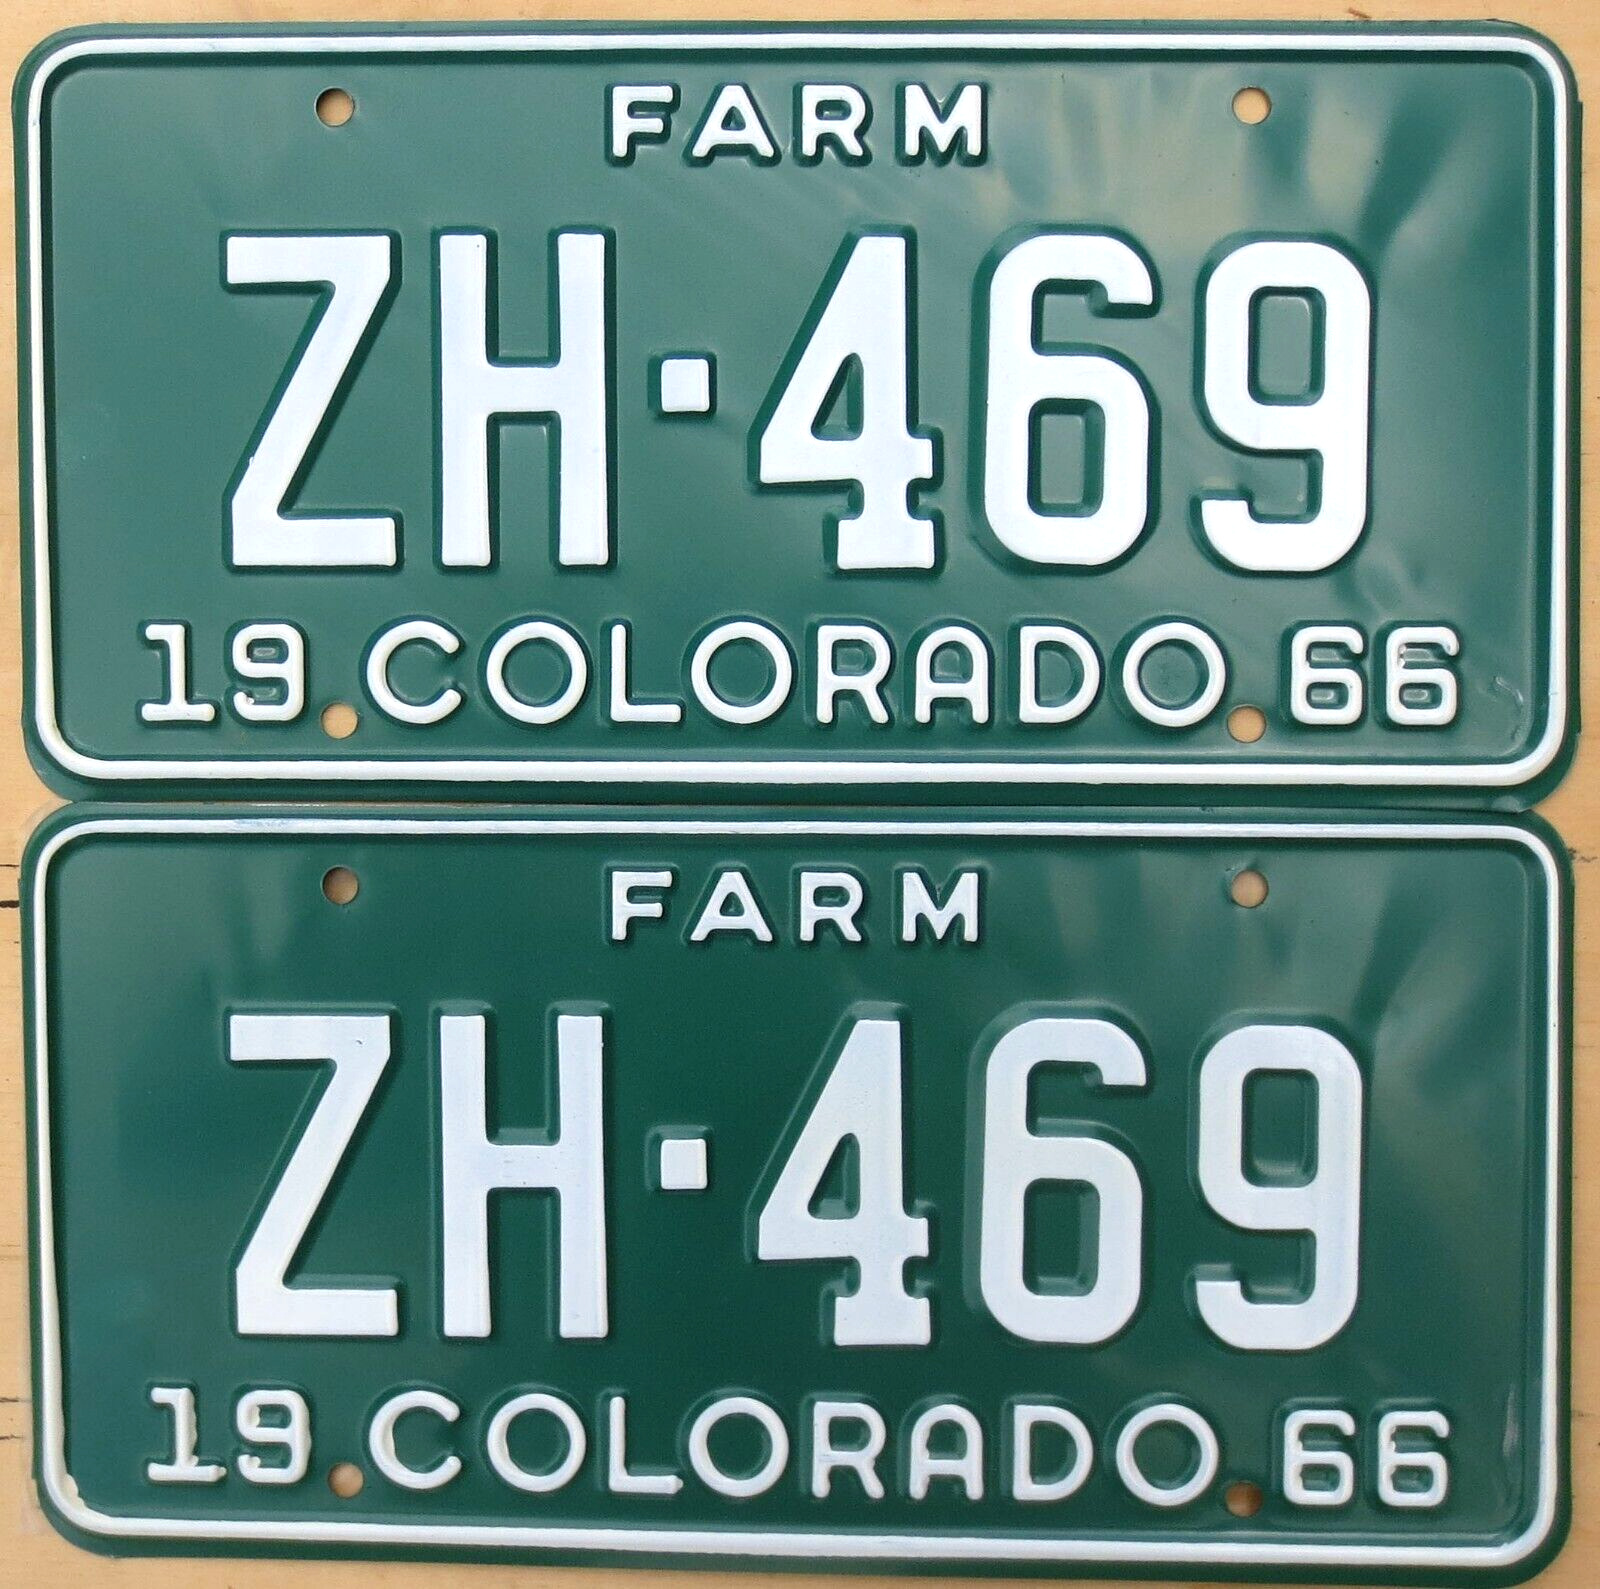 1966 Colorado License Plate Number Tag PAIR Plates - Farm Truck